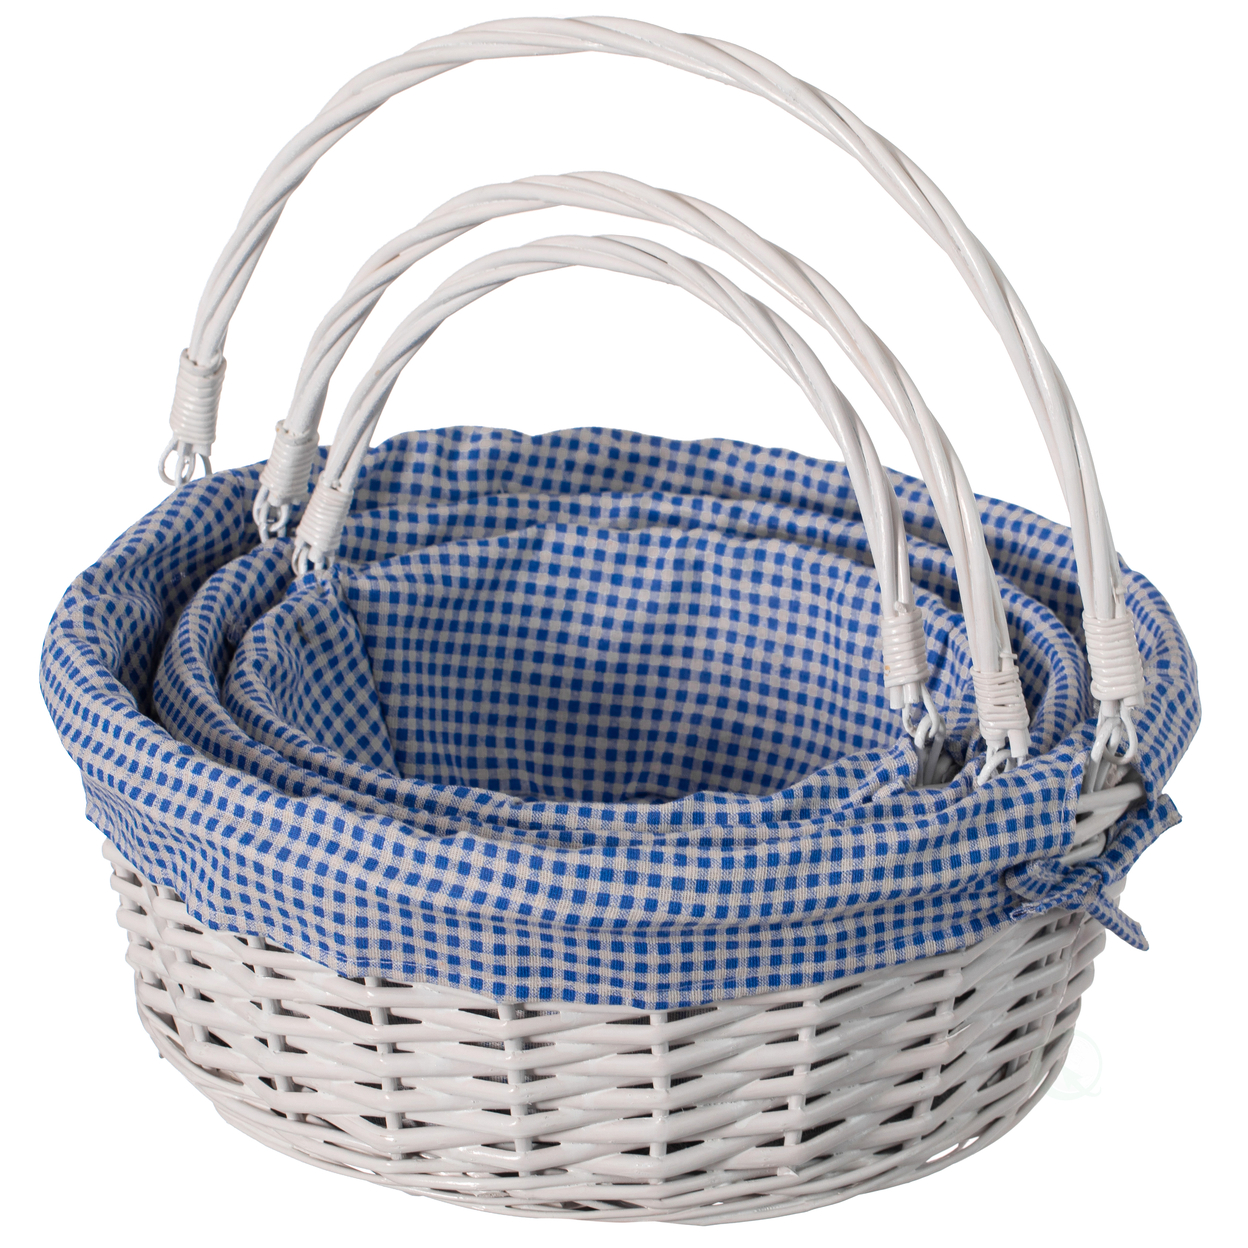 Traditional White Round Willow Gift Basket With Gingham Liner And Sturdy Foldable Handles, Food Snacks Storage Basket - Blue, Medium